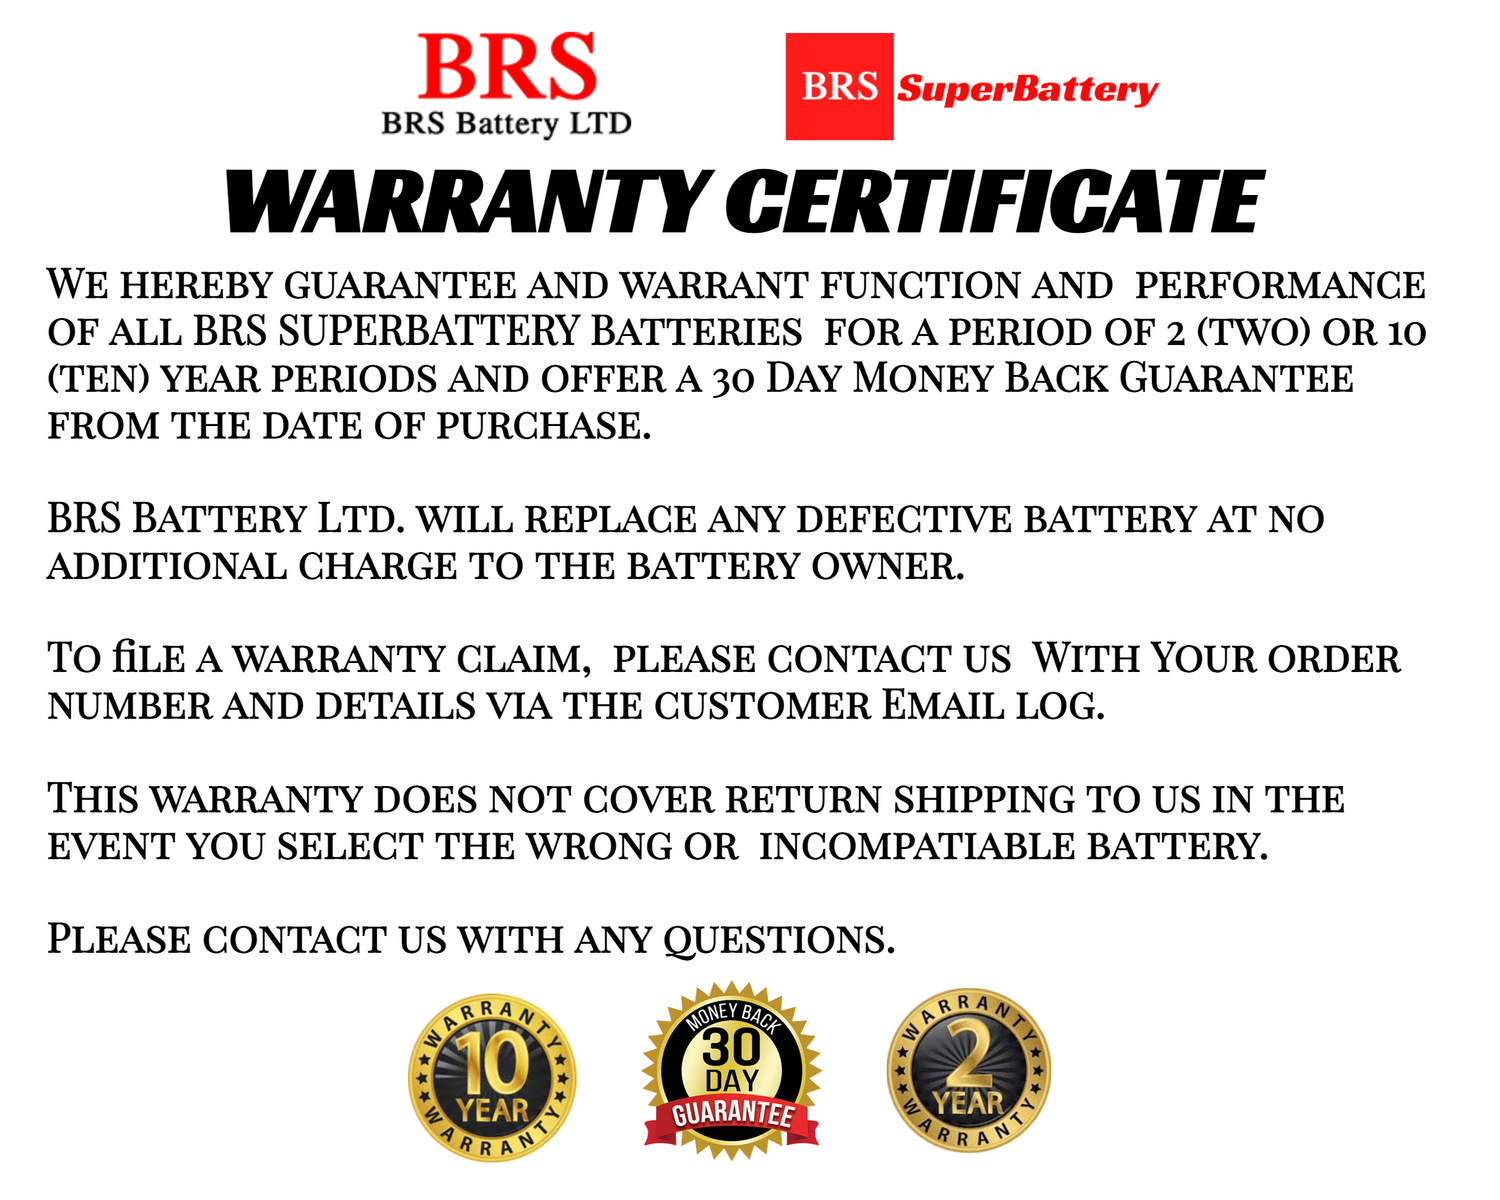 High Performance BRS20-BS 10 Year Battery & Smart Charger / Maintainer Combo Bundle Kit 12v Sealed AGM PowerSports Battery - BRS Super Battery